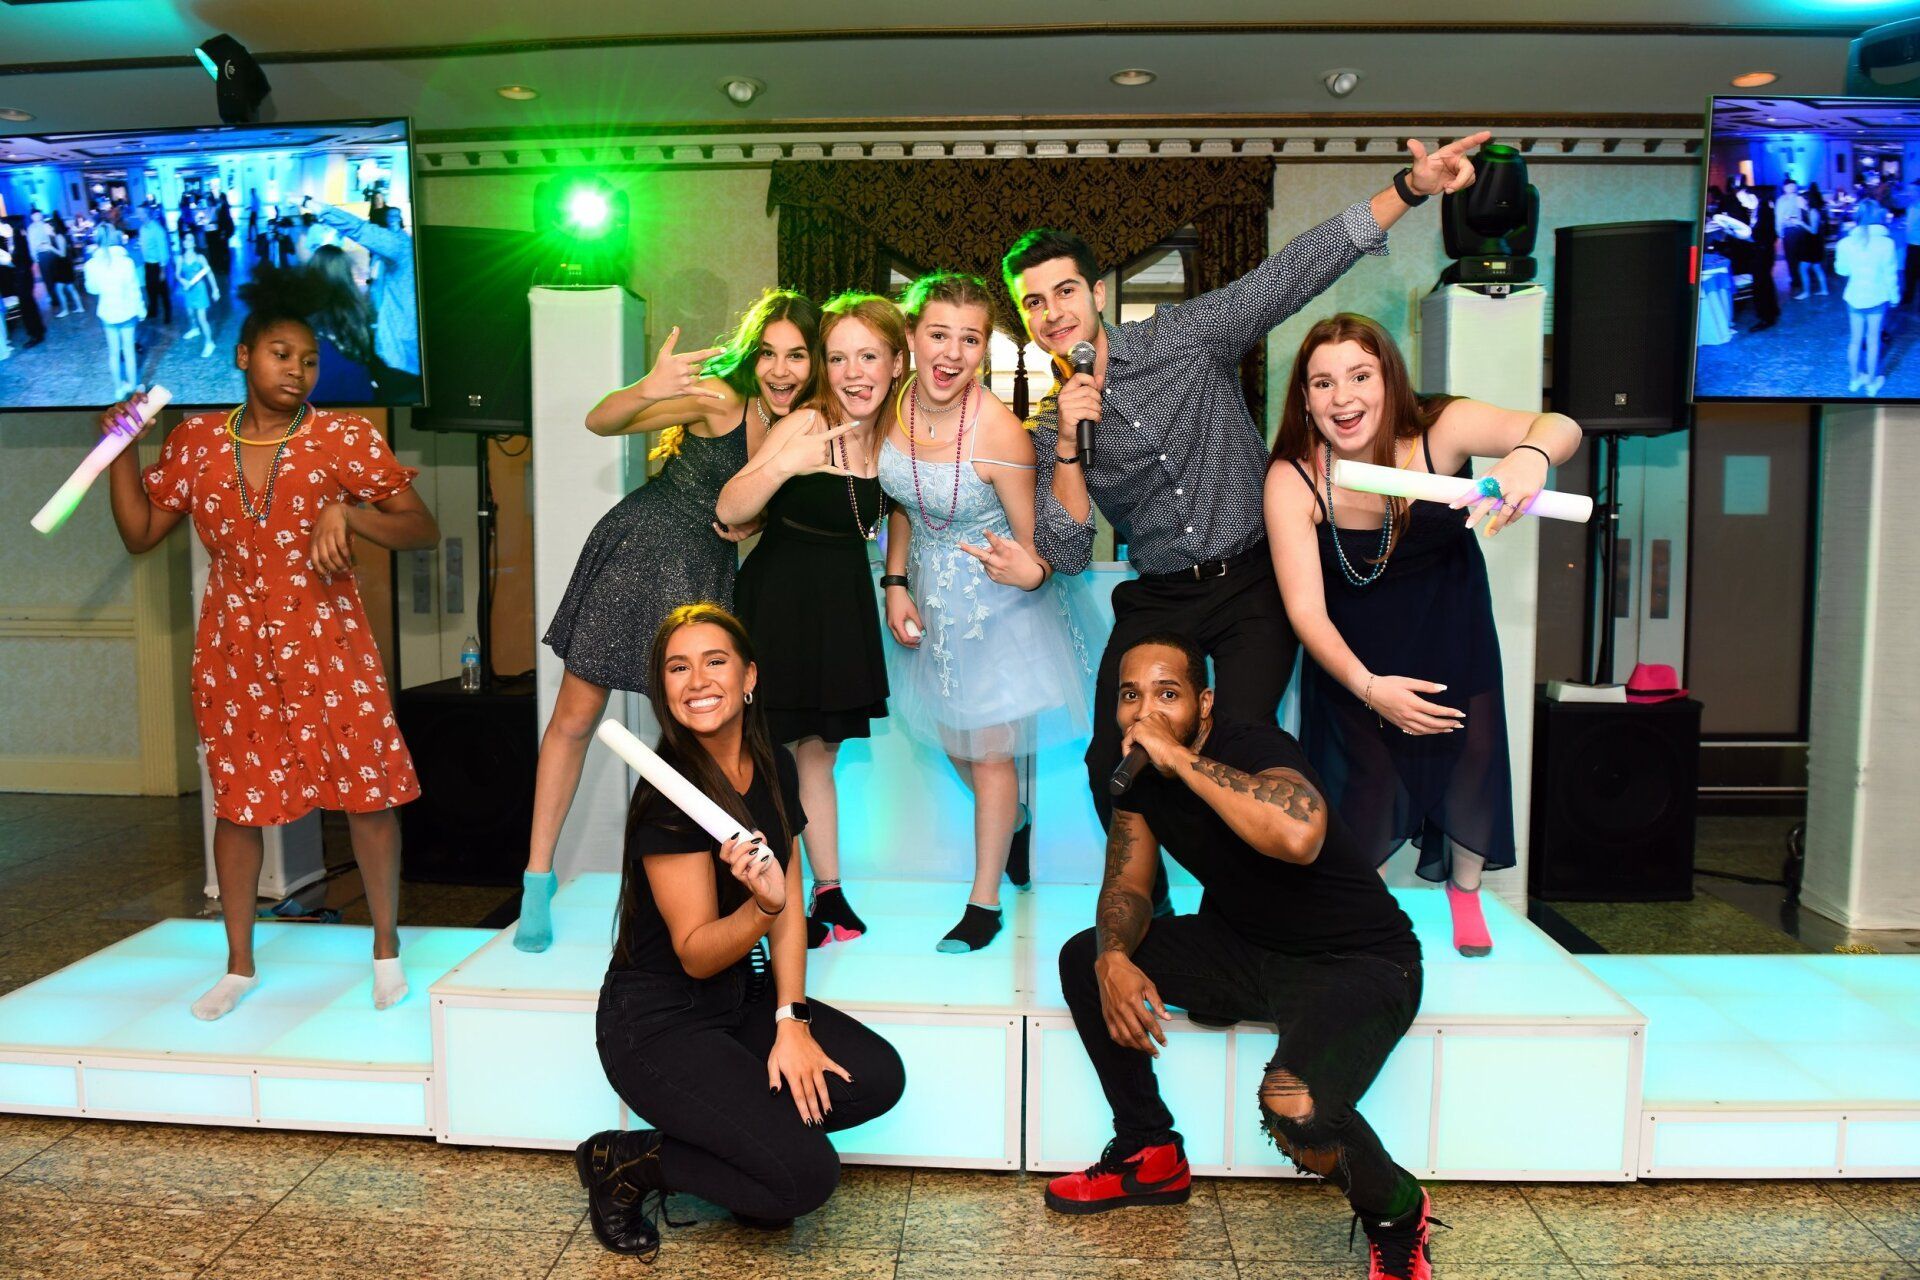 Bar Mitzvah djs, motivators and mcs  posing with guests on DJ stage.